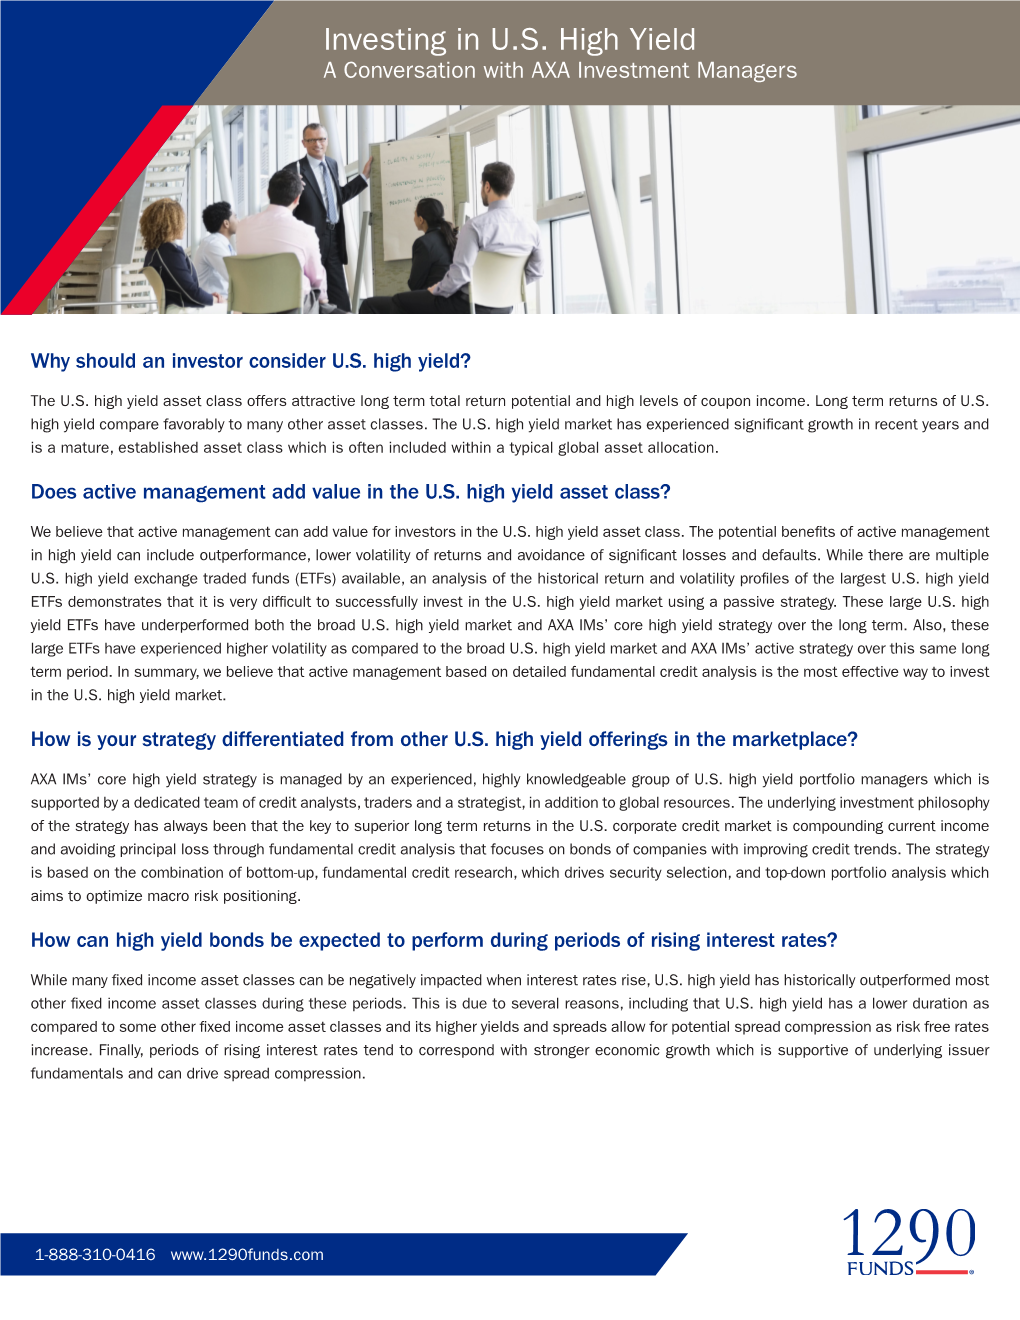 Investing in U.S. High Yield a Conversation with AXA Investment Managers